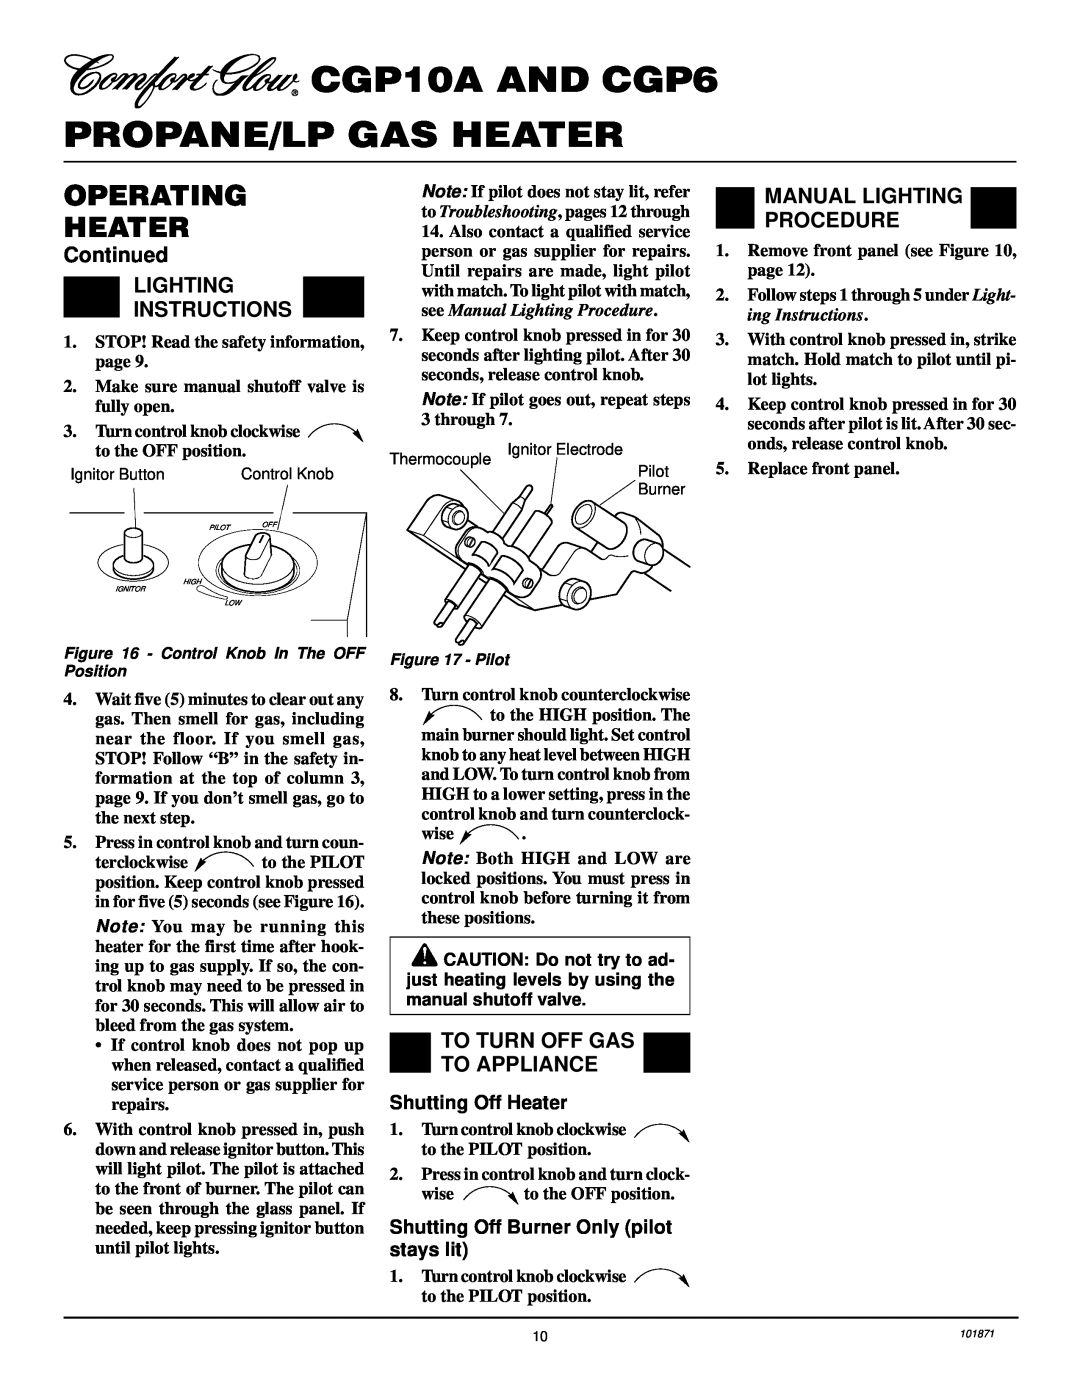 Desa CGP6 Continued LIGHTING INSTRUCTIONS, Manual Lighting Procedure, To Turn Off Gas To Appliance, Shutting Off Heater 